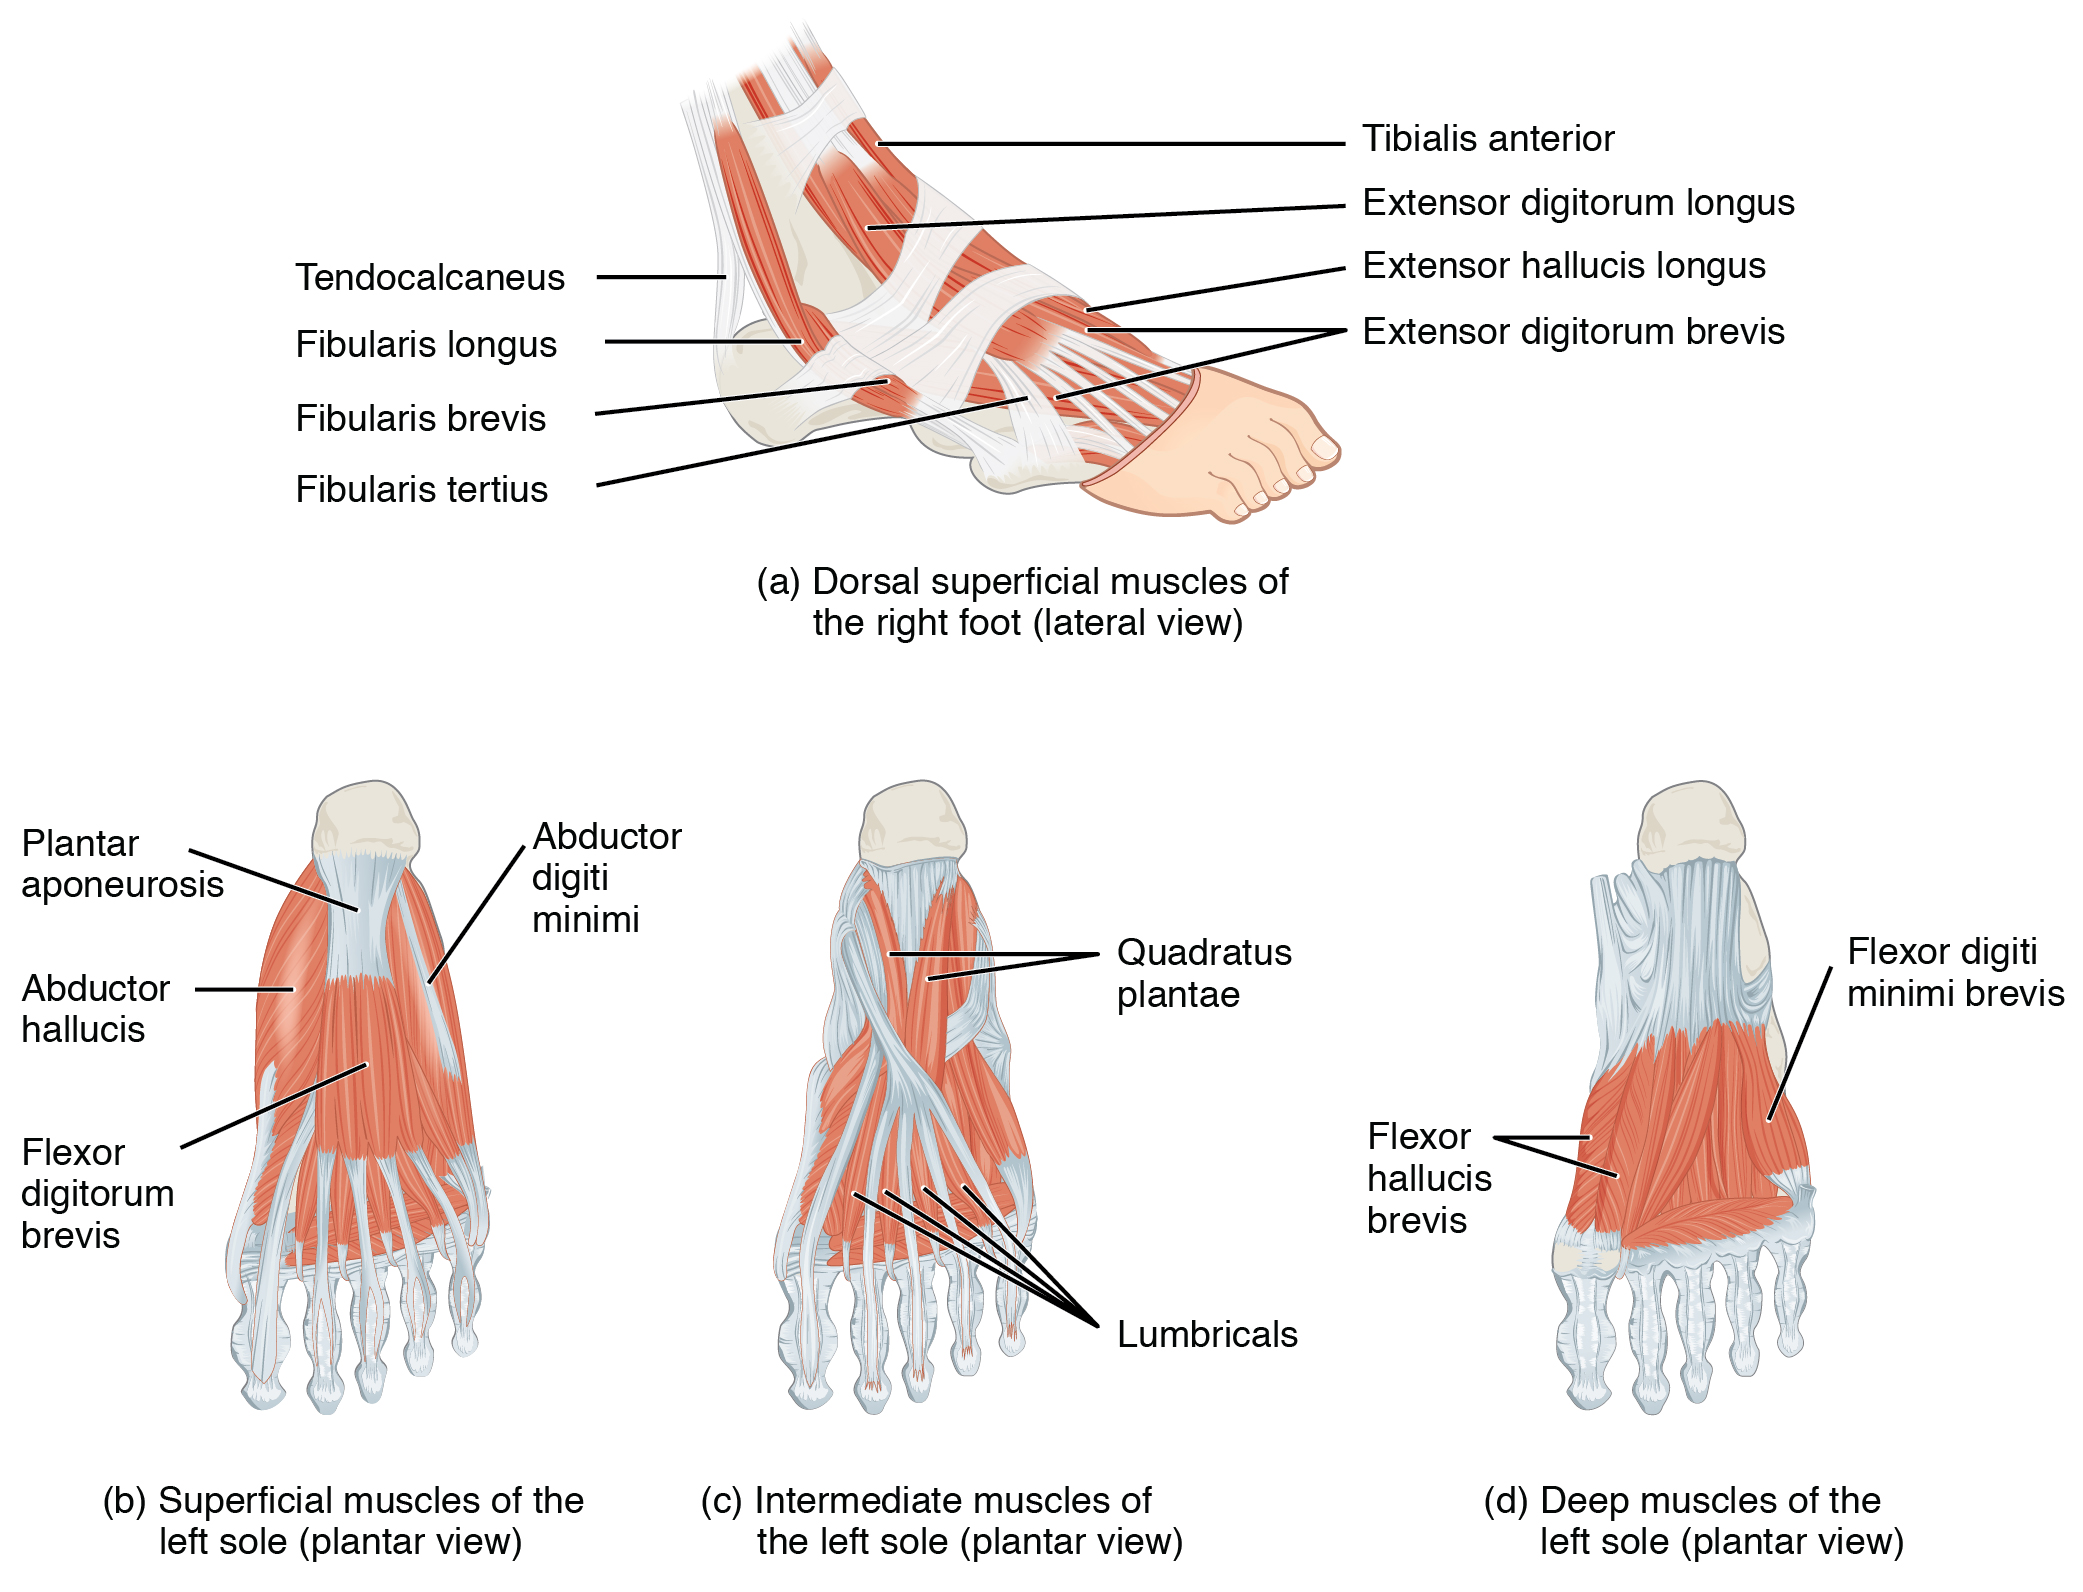 lateral view of the doral  superficial muscles of the right foot; plantar views of: superficial muscles, intermediate muscles, and deep muscles, of the left sole of foot